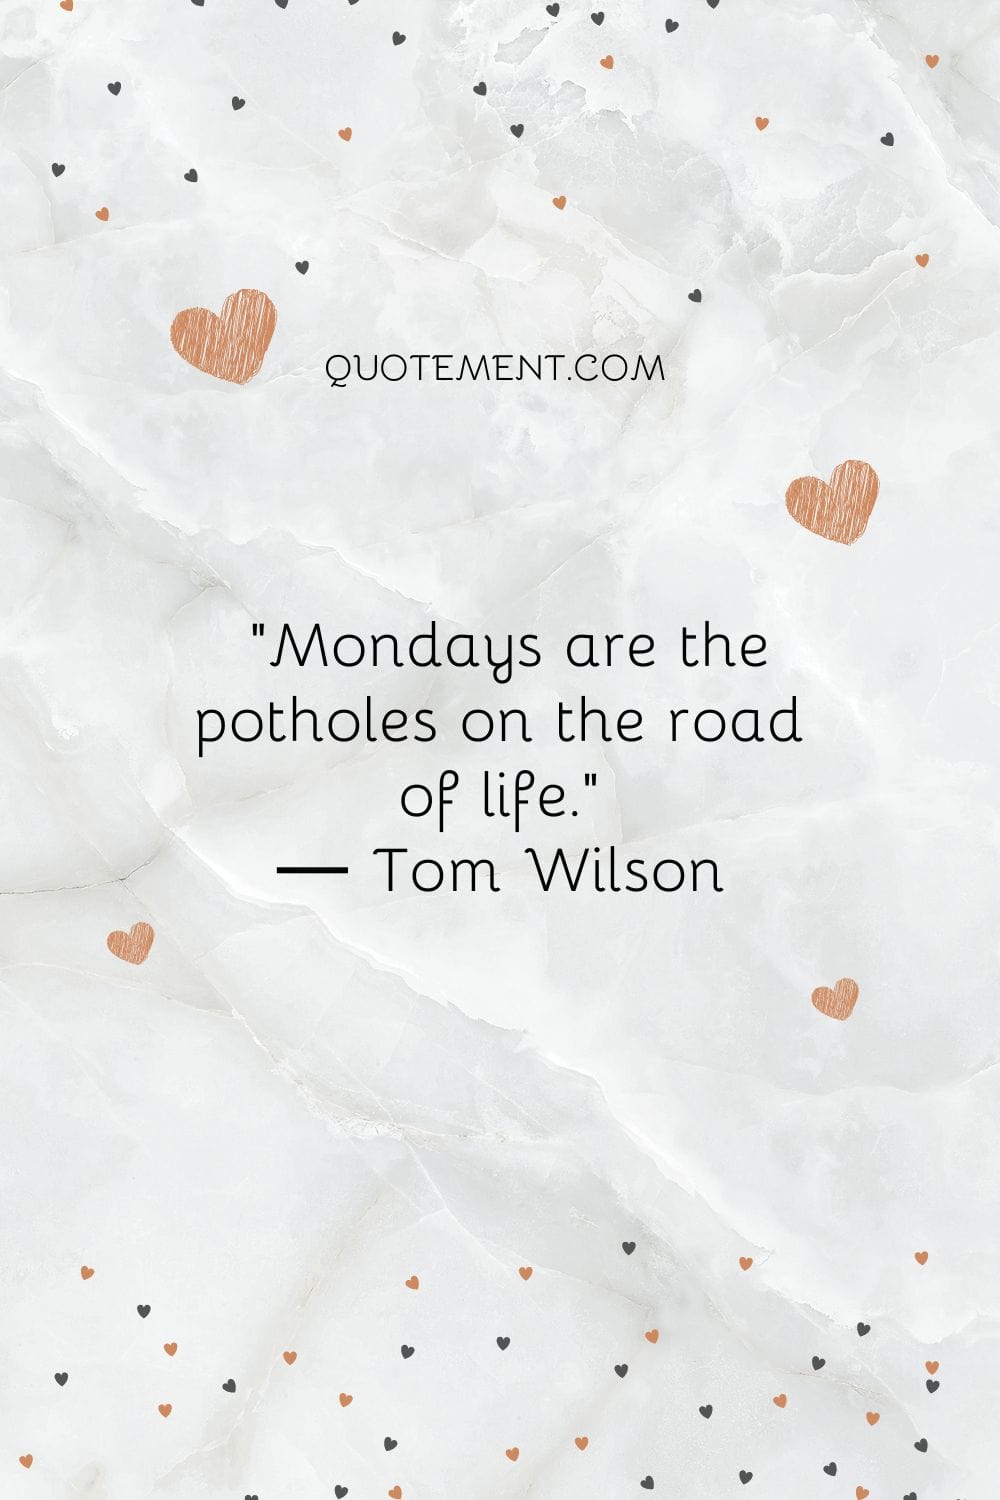 Mondays are the potholes on the road of life